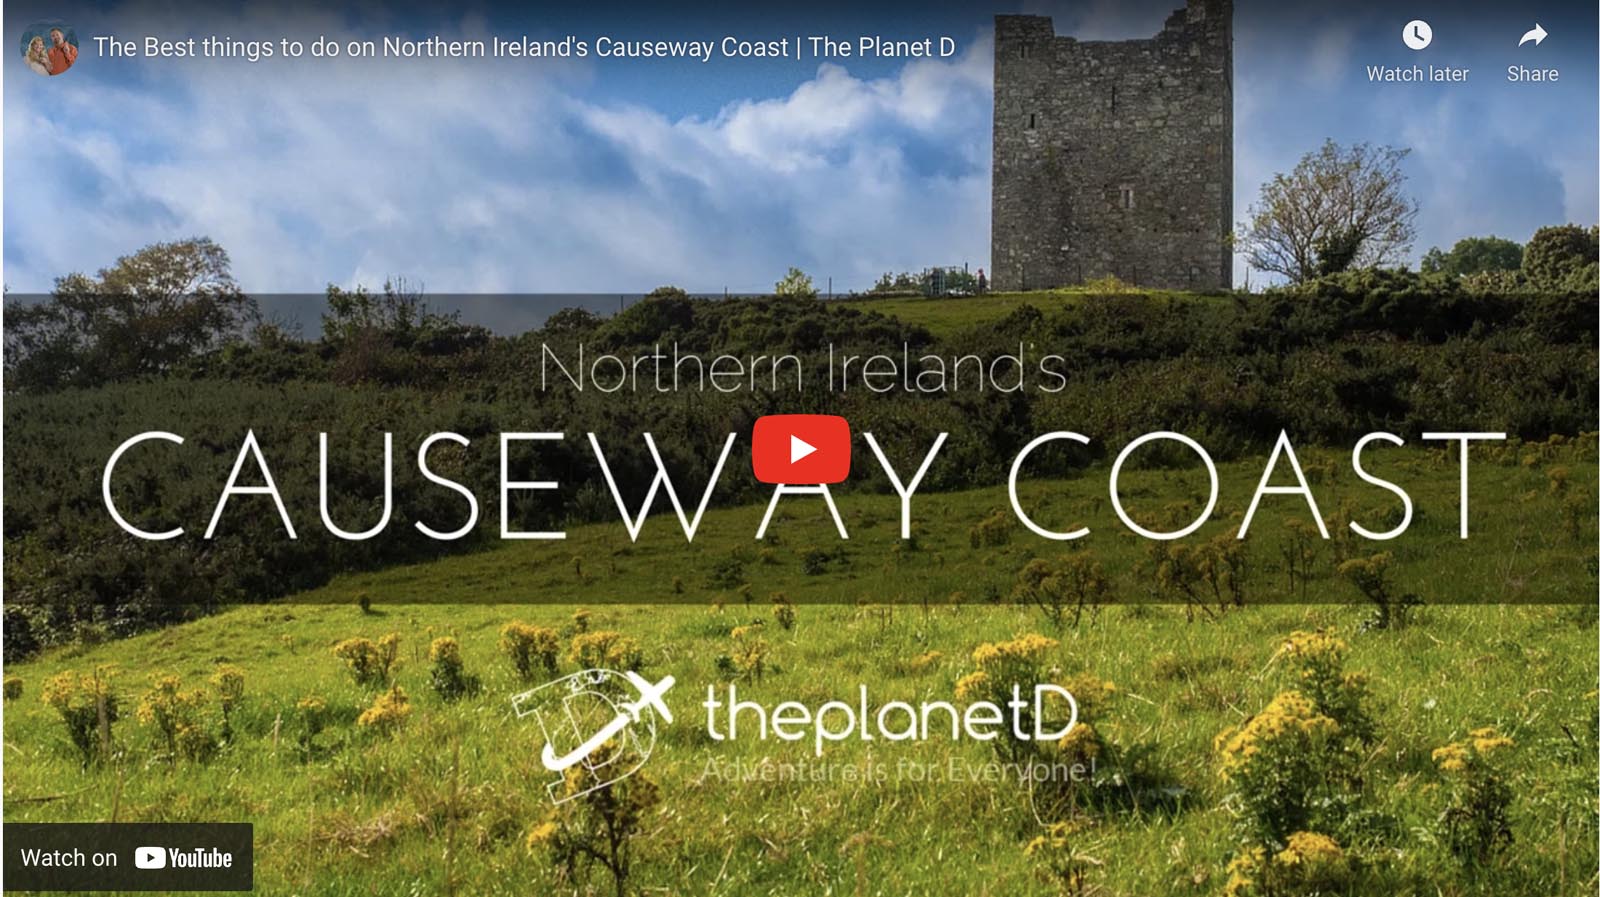 Vdeo of the Causeway Coast in Northern Ireland